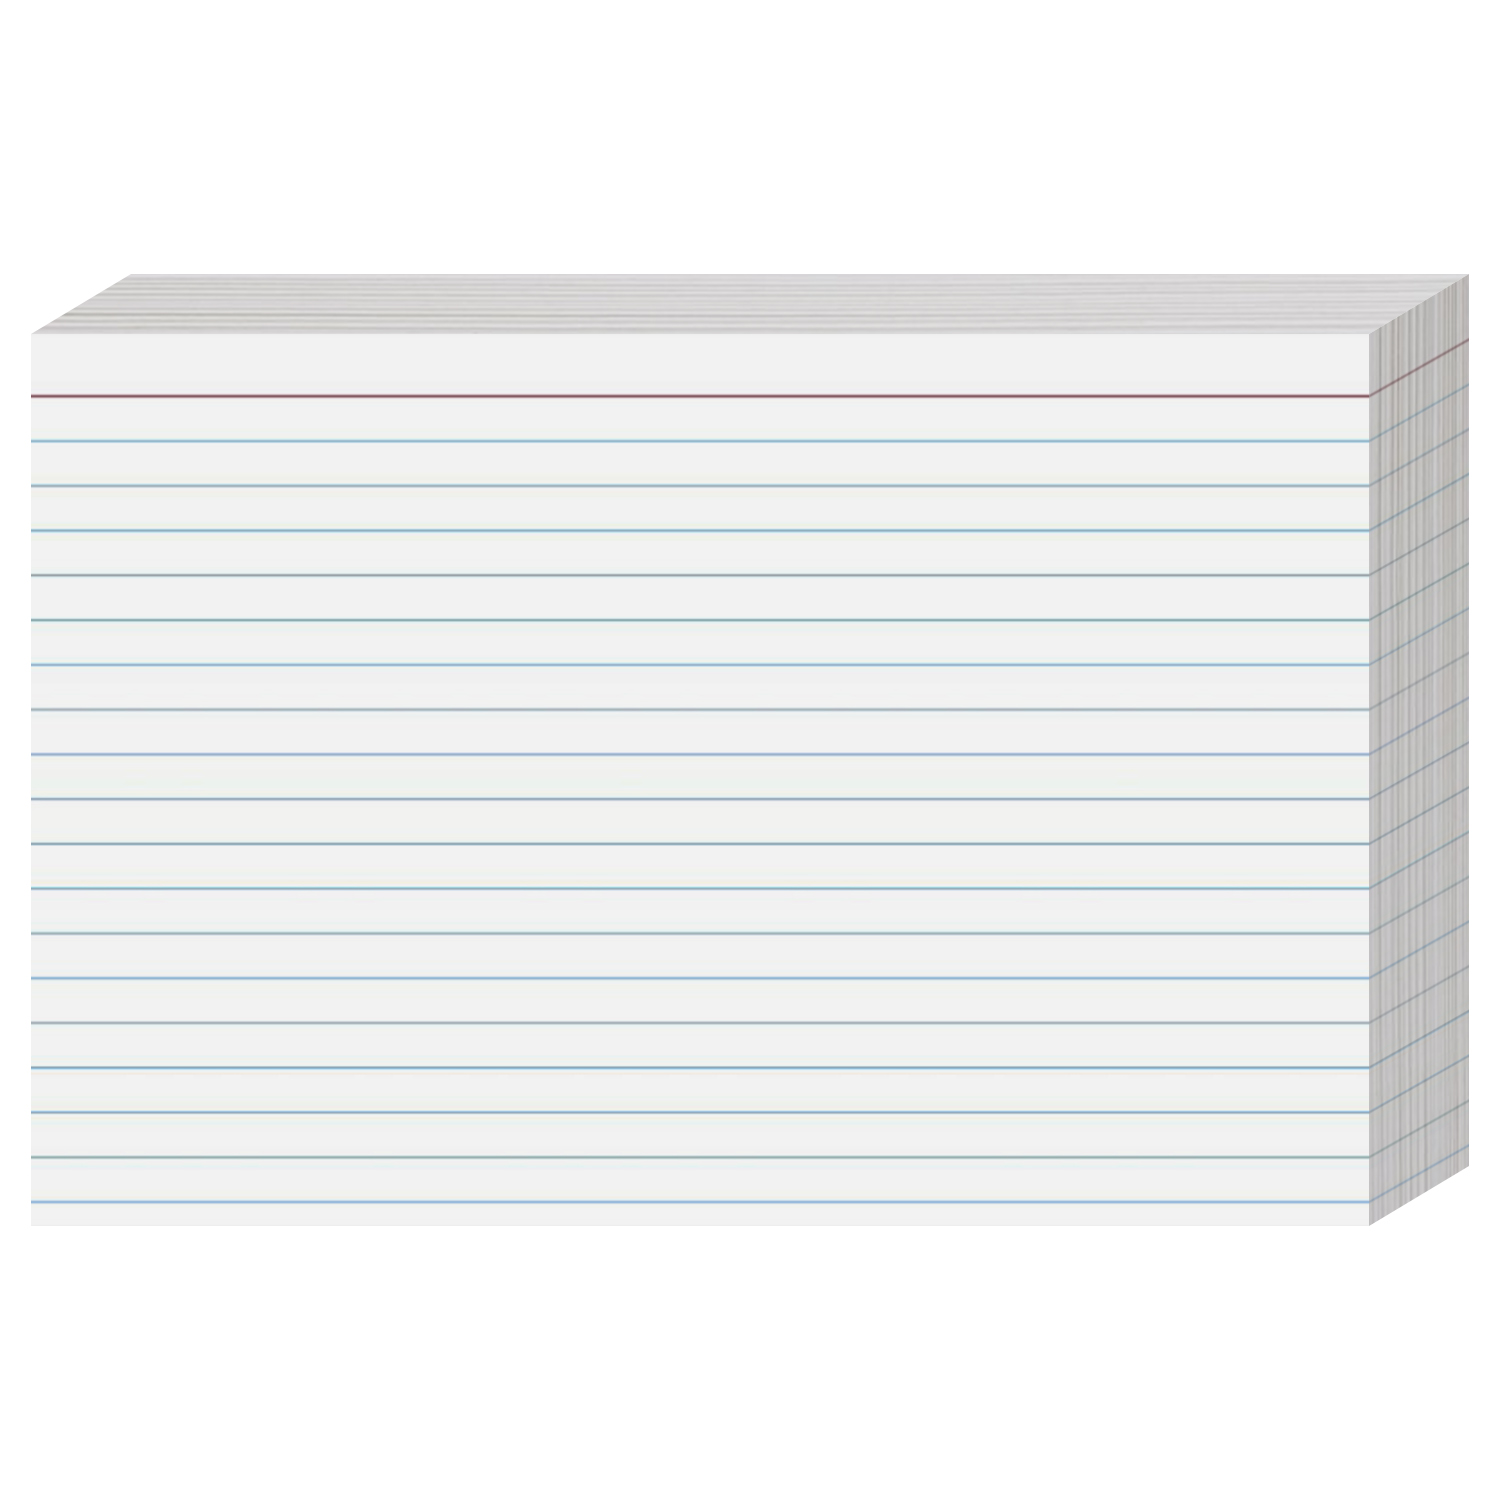 4 inch x 6 inch Ruled Index Cards, Thick and Heavyweight White 80lb (216 Gsm) Cover Stock | Great for Notes, Lists, Schedules | 100 Cards per Pack